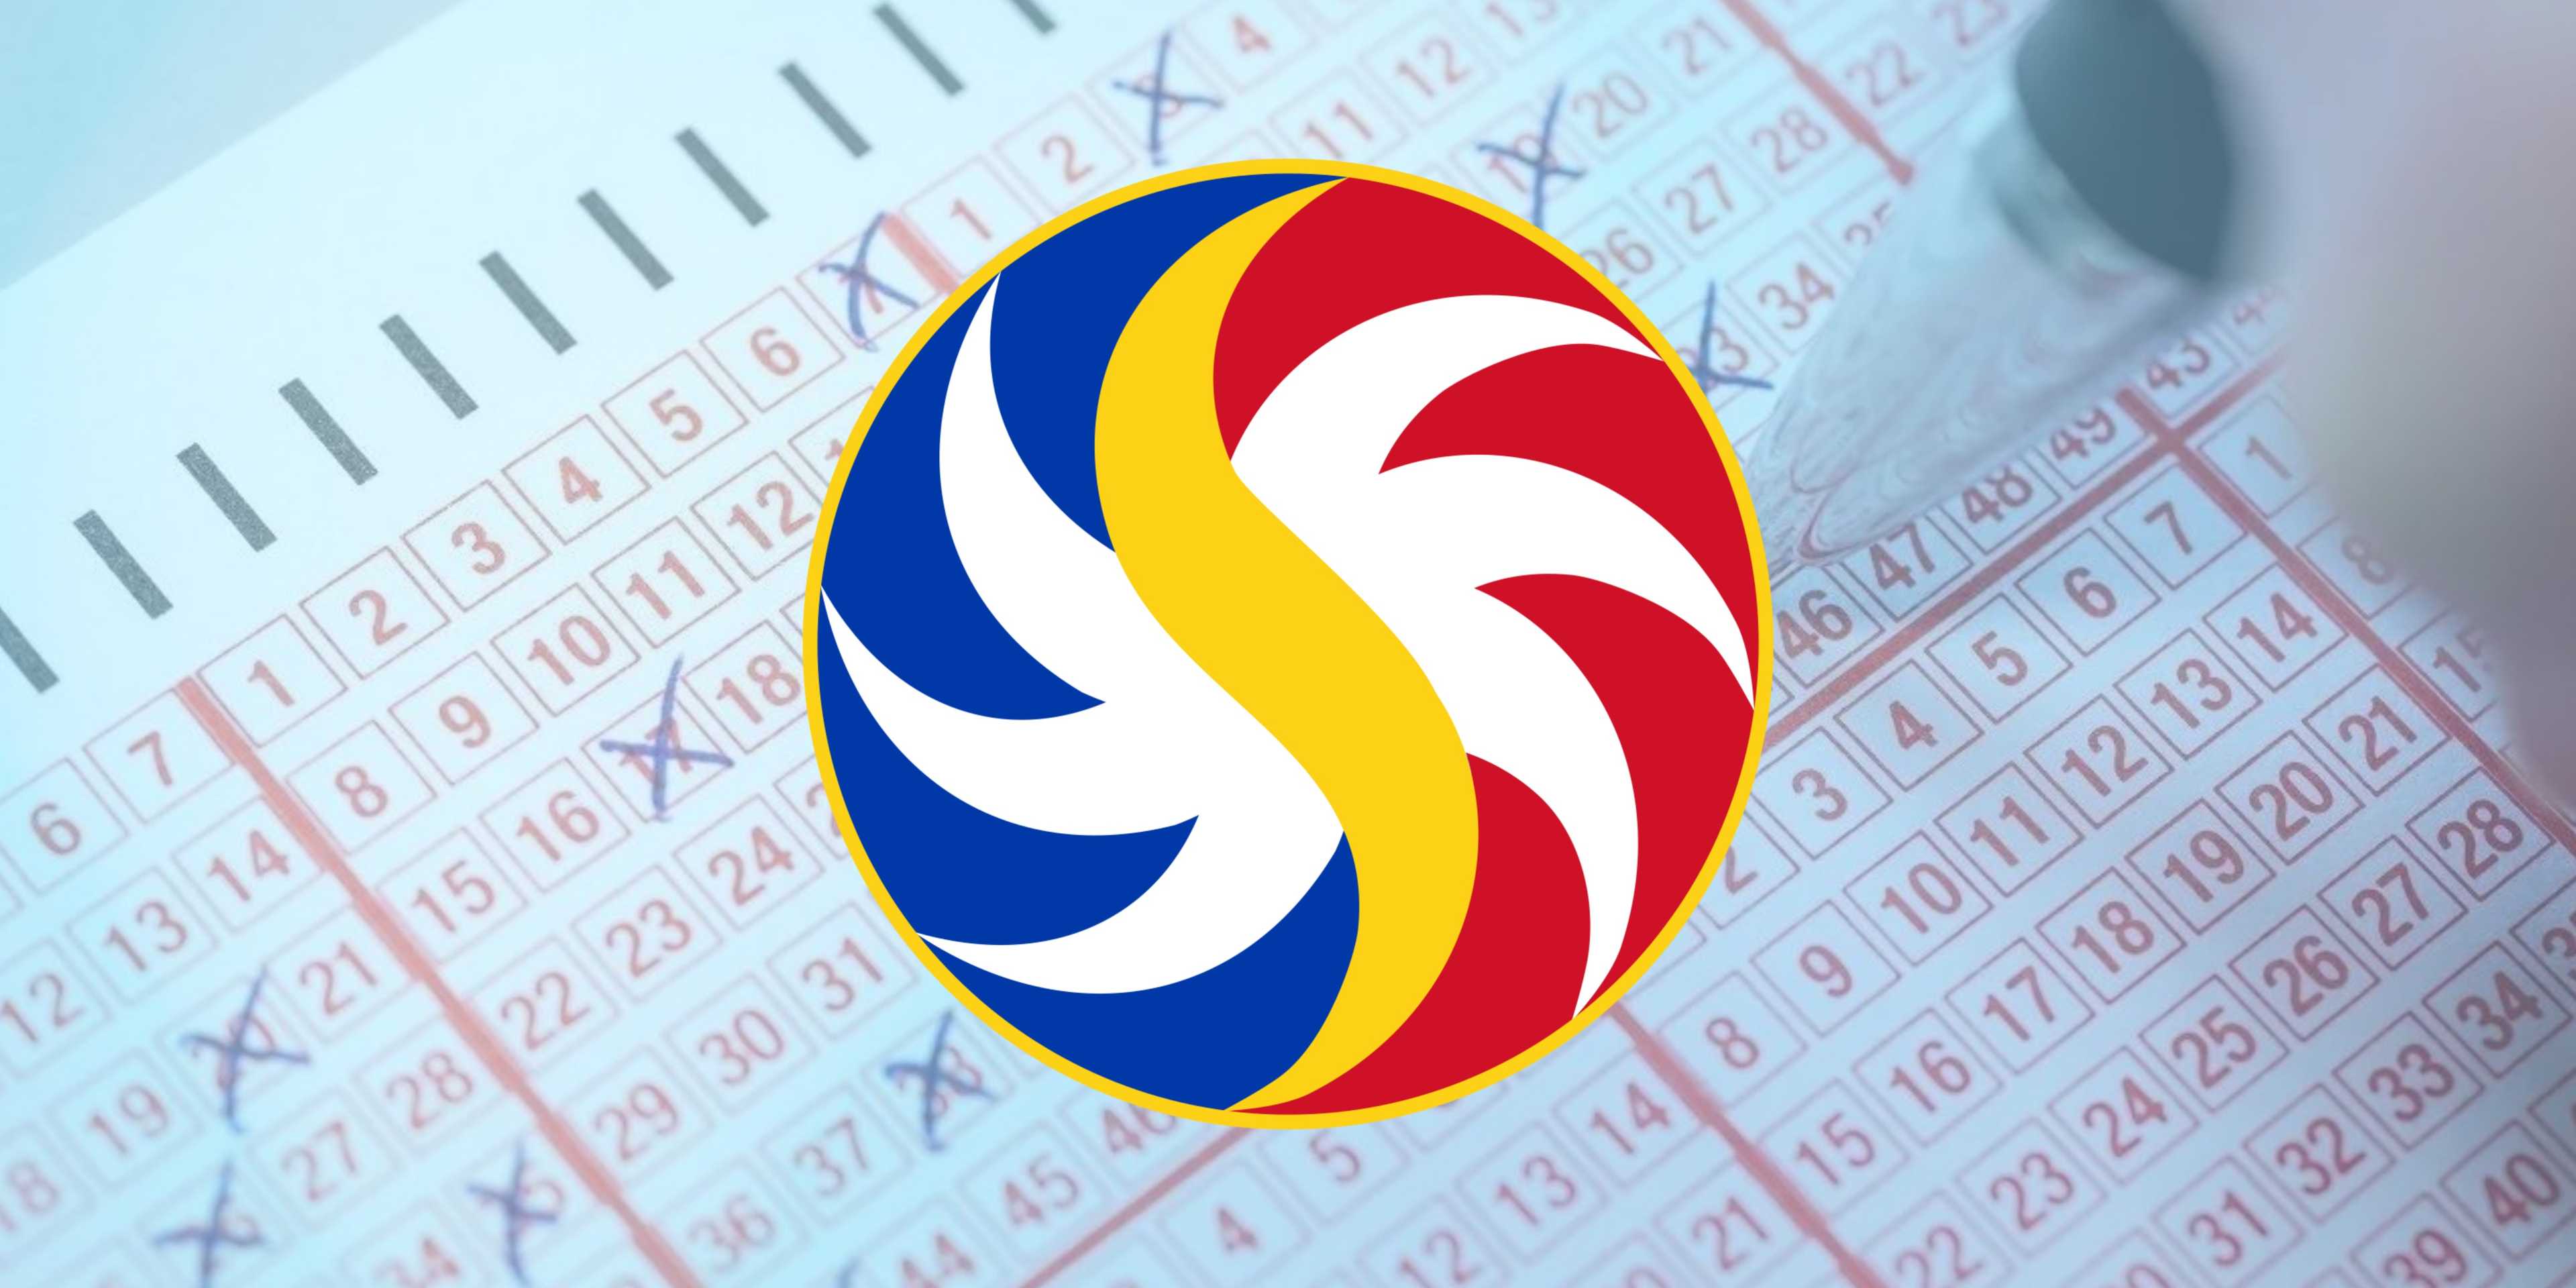 PCSO Lotto Draw Results on Thursday, March 21